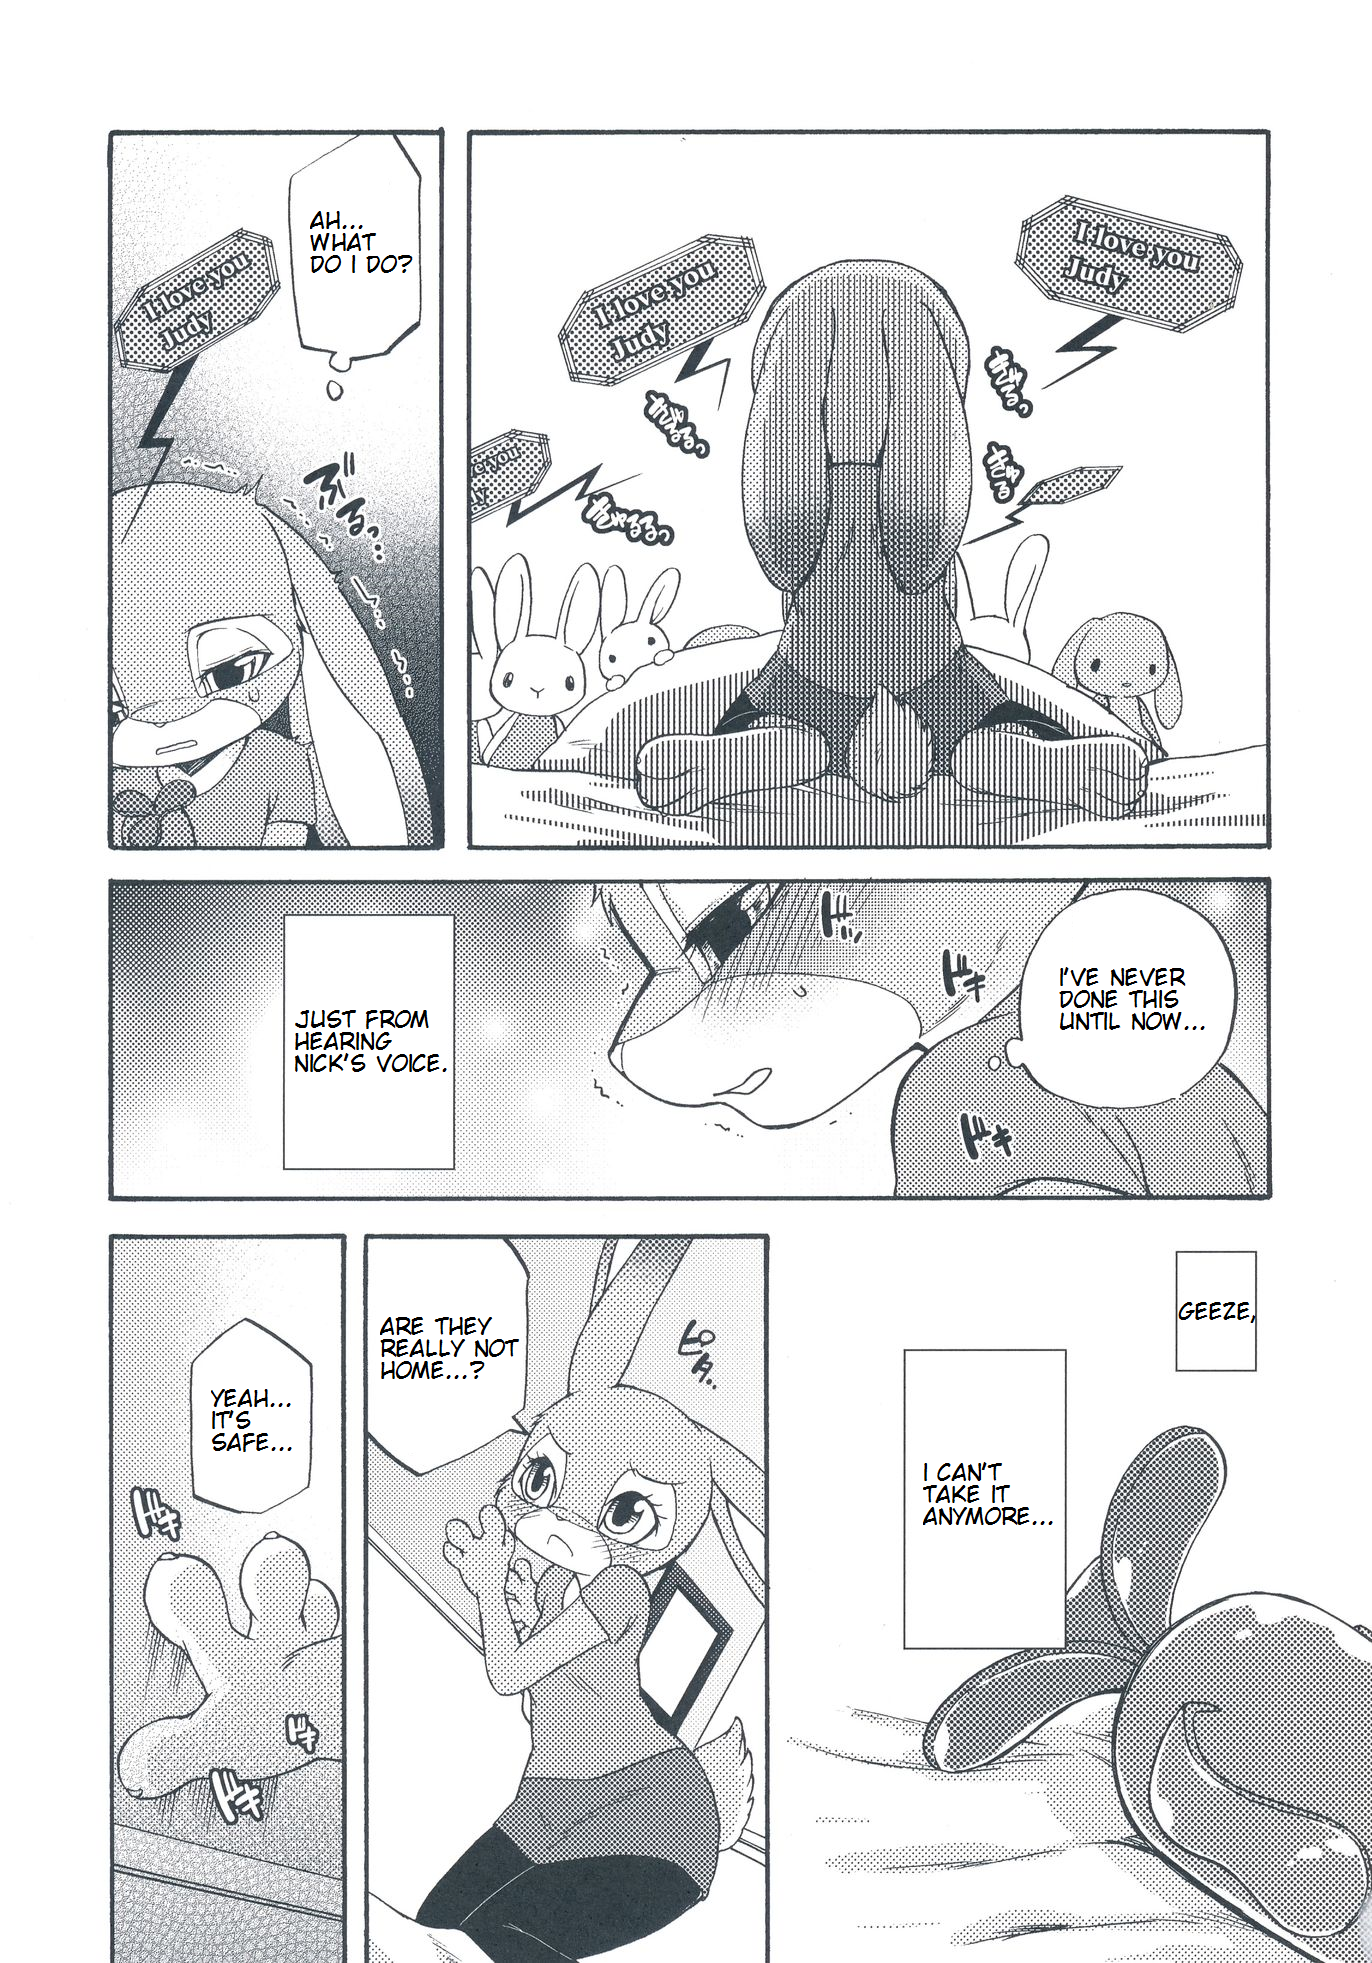 Carrots-For-One-ENG-page015--Gotofap.tk--96277418.png